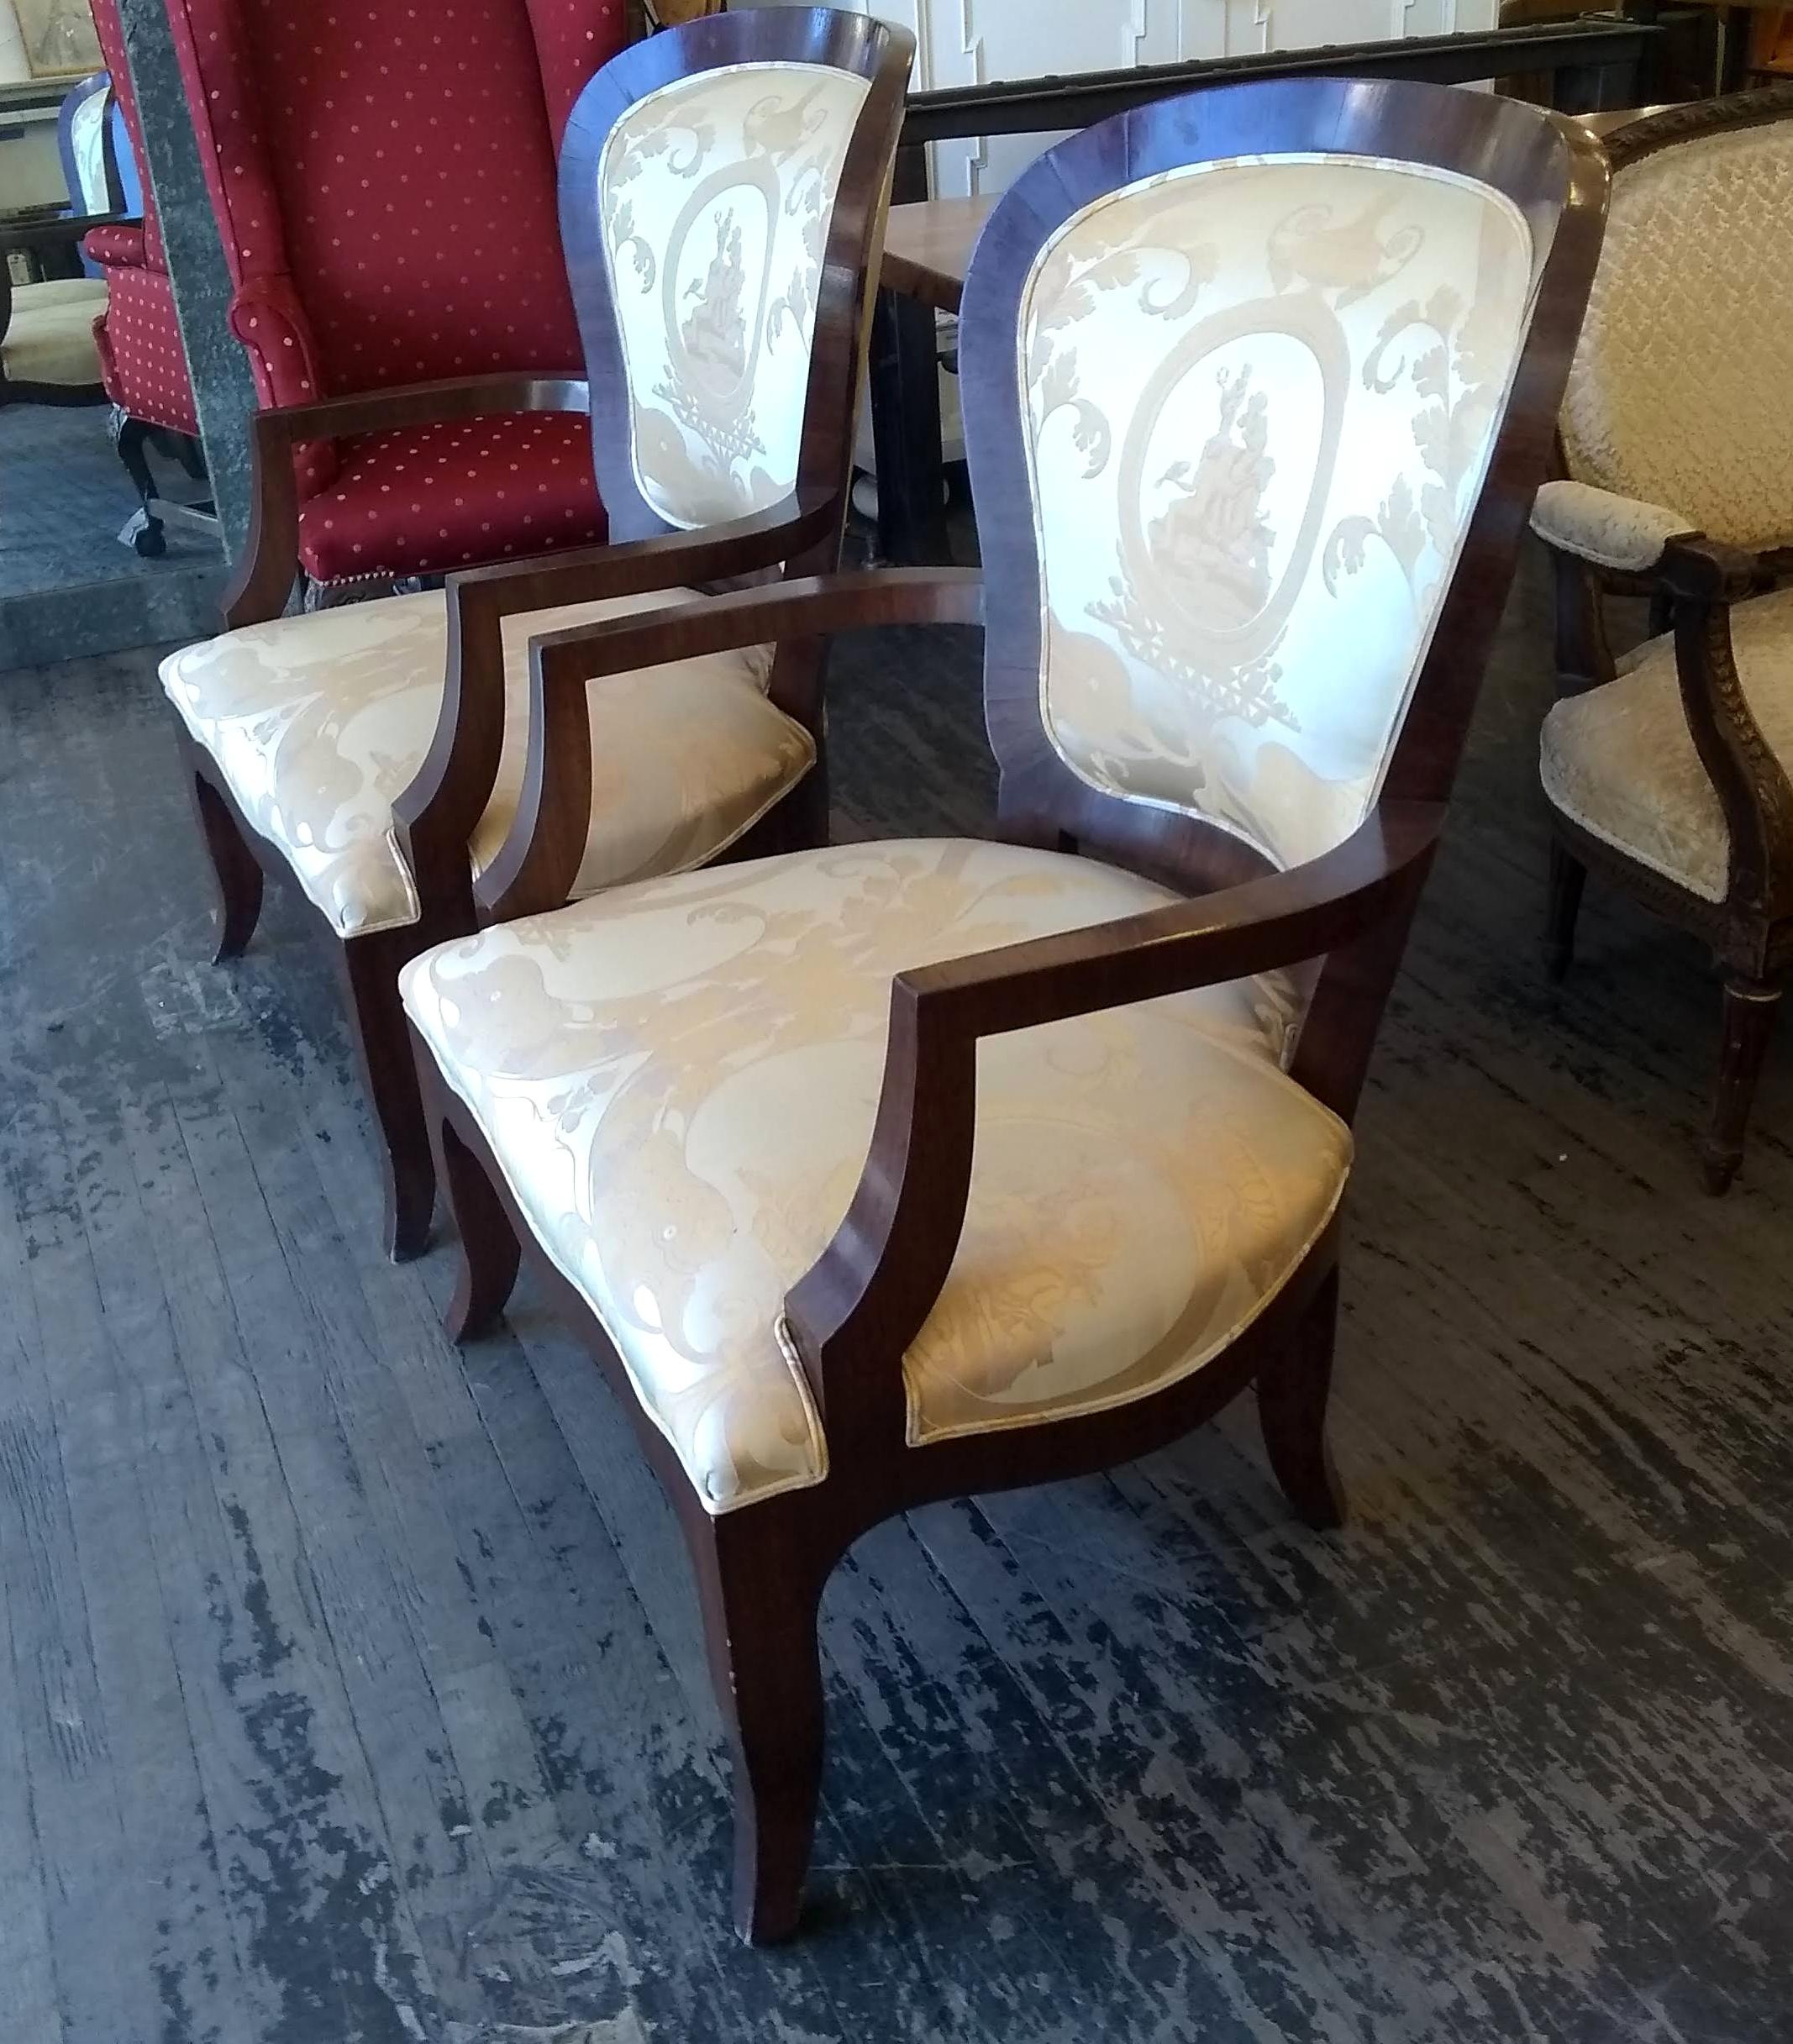 1800s silk armchairs with decorative detailing on the fabric and a dark mahogany wood tone frame. There is minor cracking on the veneer. Priced as a pair. Please note, this item is located in our Los Angeles location.